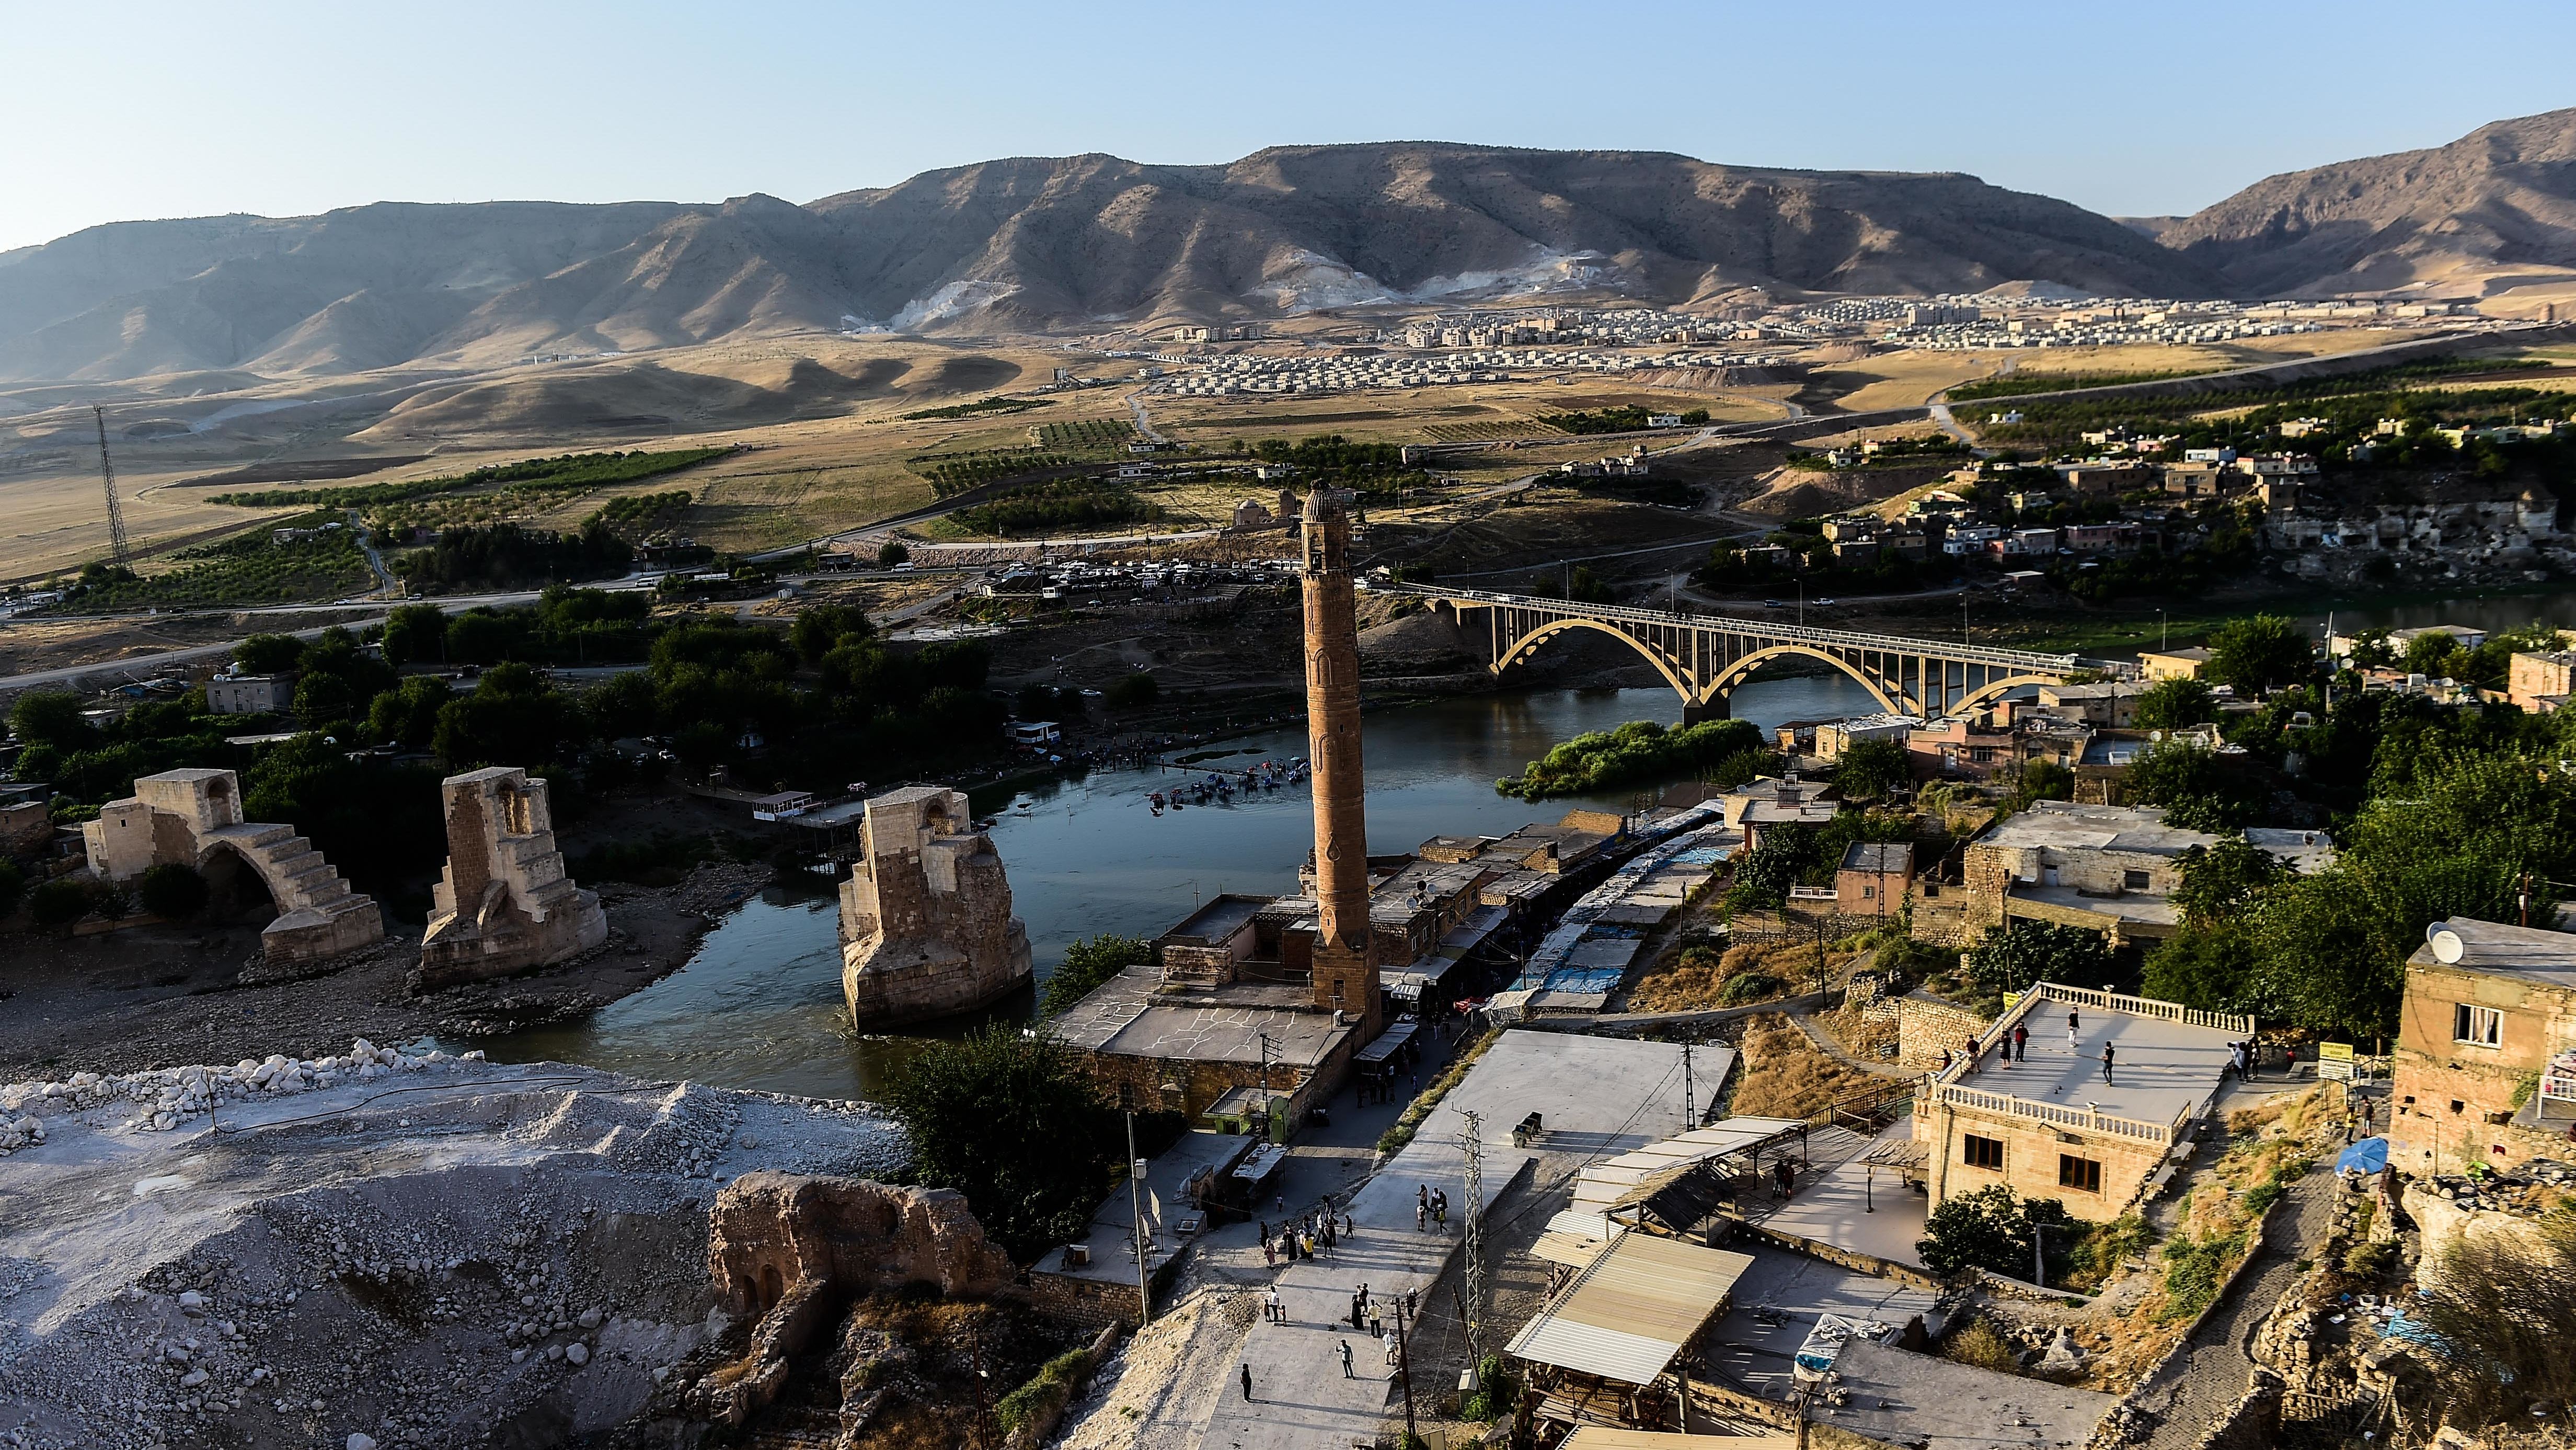 A view of the construction work along the Tigris River that runs through the 12,000-year-old Hasankeyf settlement and ancient citadel town which will soon be significantly submerged by the waters of the nearby Ilisu dam in southeastern Turkey, on July 29, 2018. - The Turkish town of Hasankeyf, a former trading post along the Silk Road, which has seen the Romans, Byzantines, Turkic tribes and Ottomans leave their mark, will soon be partially flooded by the Ilisu Dam, as part of the Southeast Anatolian project (Gap) and one of Turkeys largest hydroelectric projects, which is being built down stream. The inauguration of T